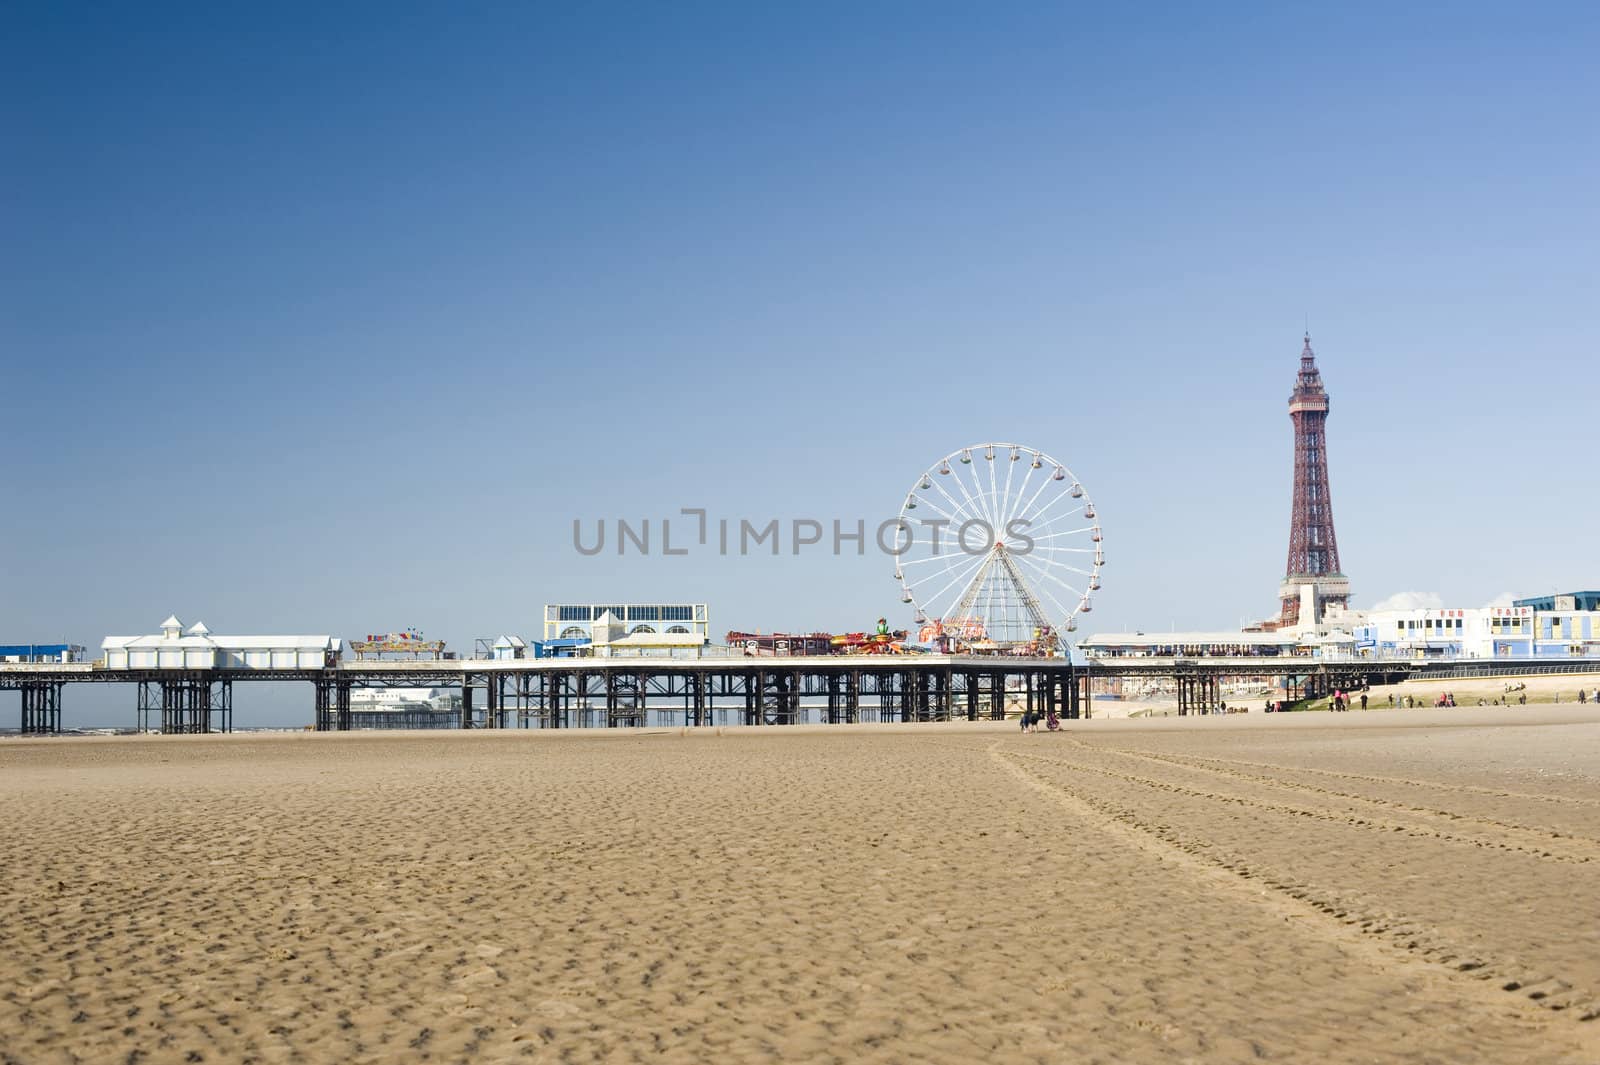 View across the sand of Blackpool Beach to the pier with the historic Blackpool Tower and pier in the background